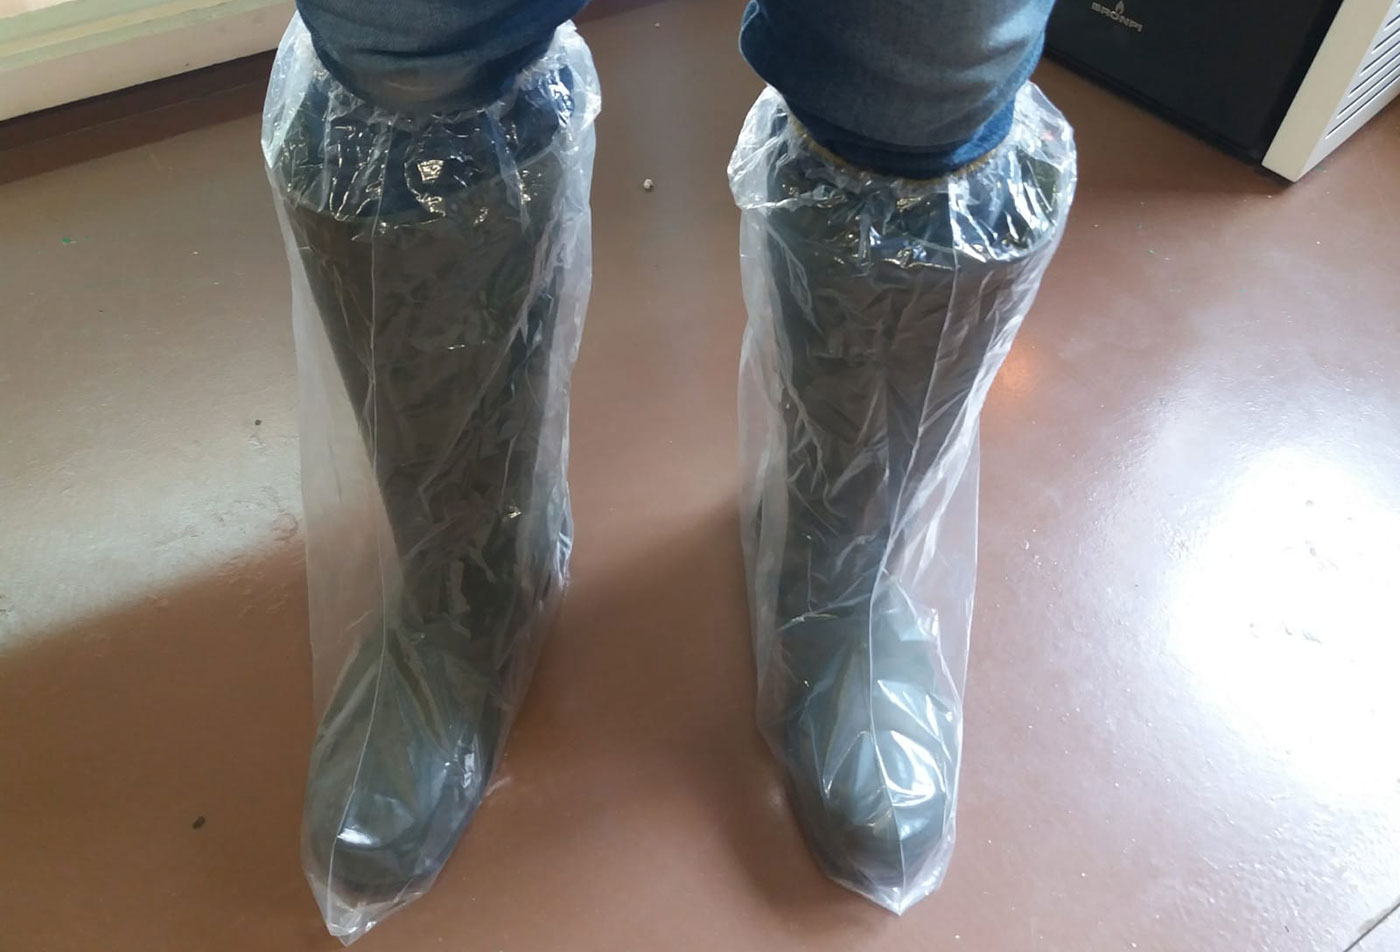 biosecurity boot covers